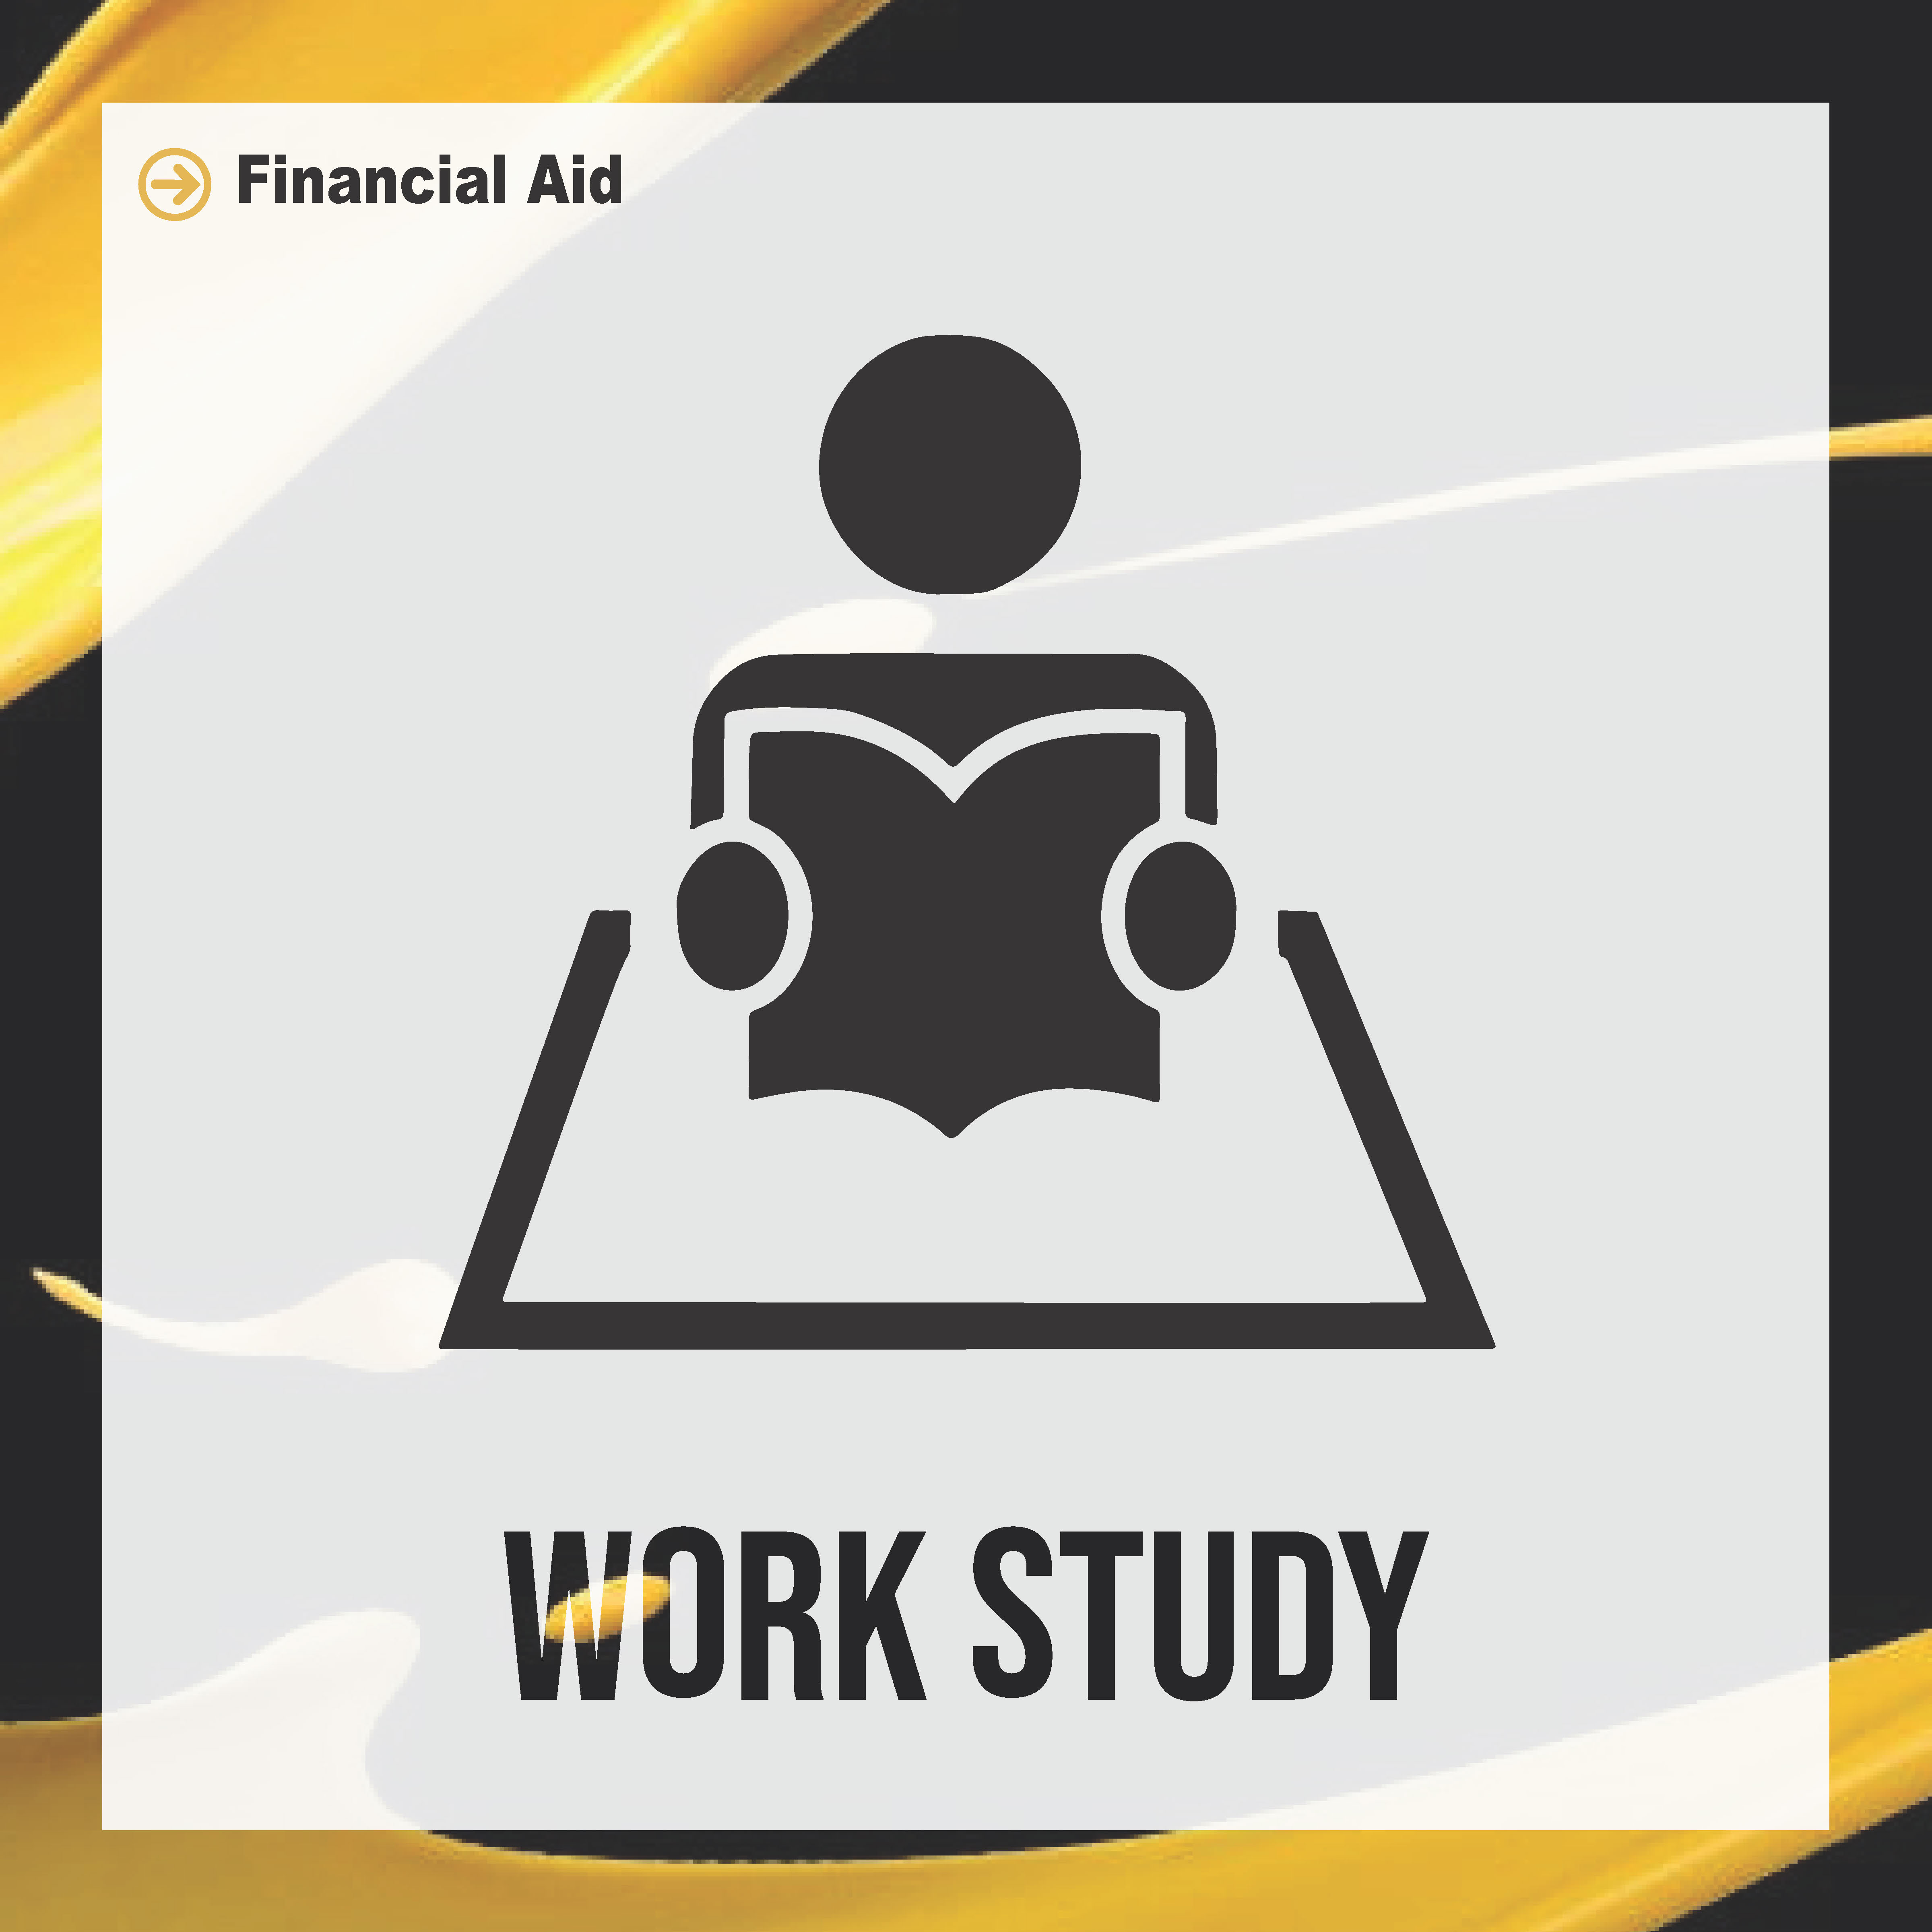 Financial Aid Work Study (with circles and arrows)